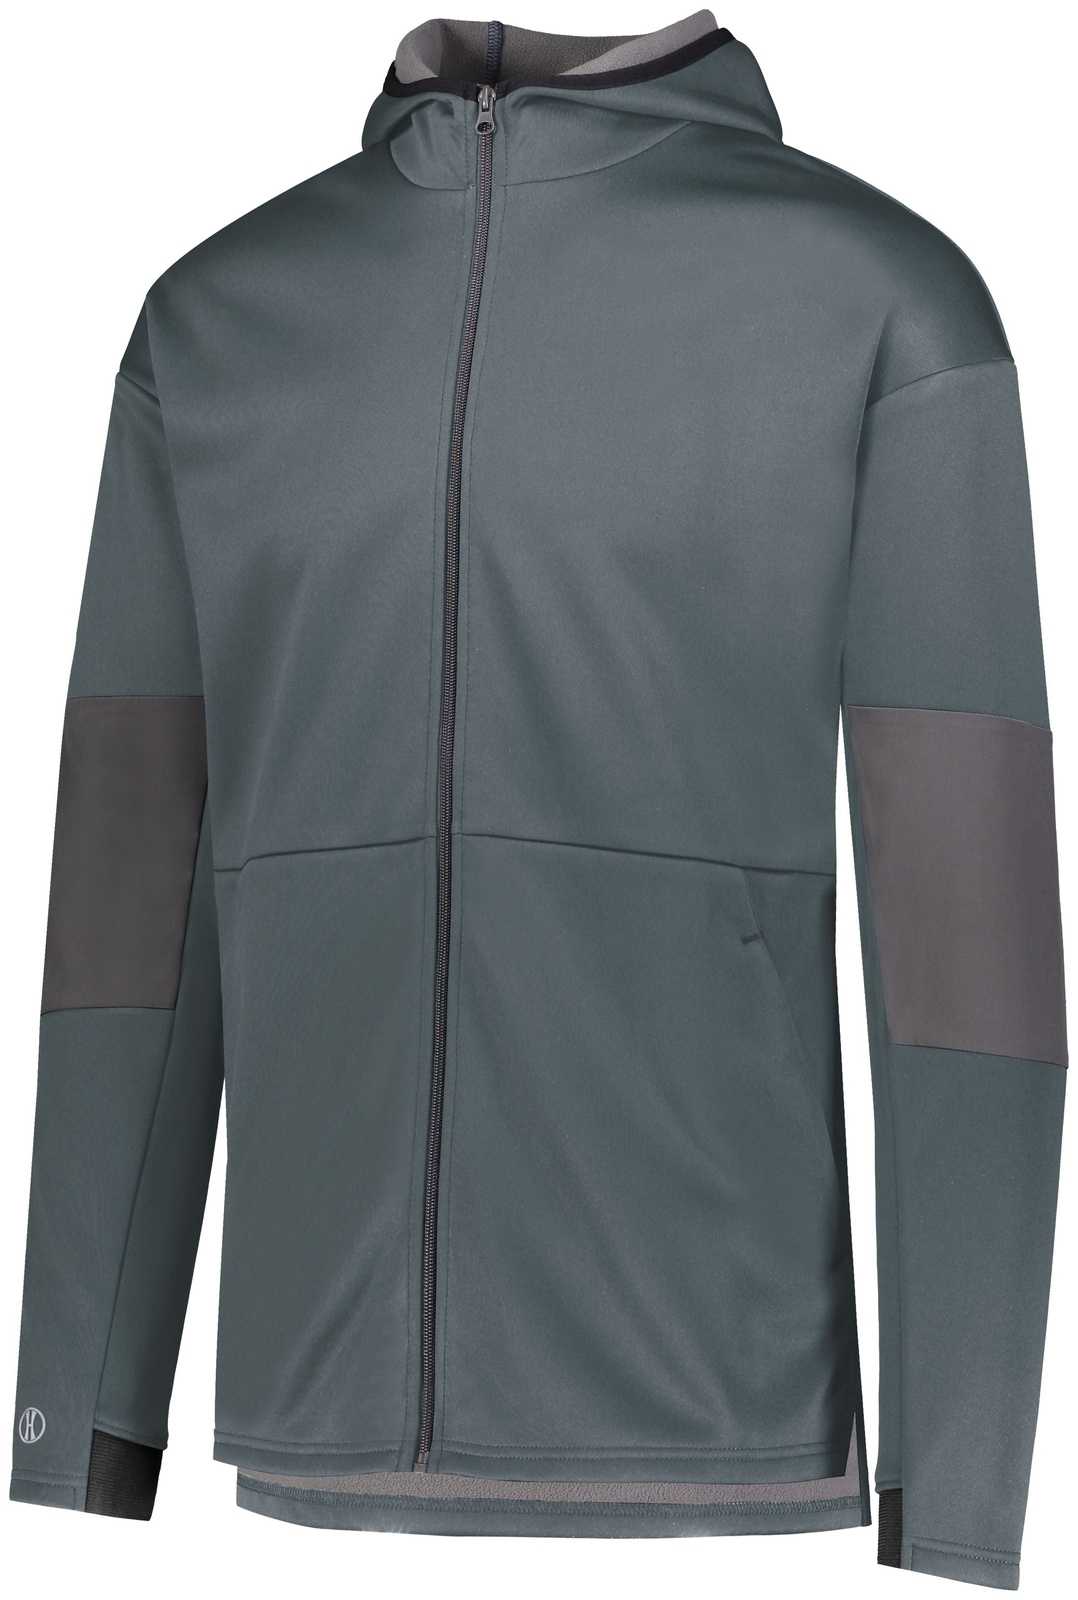 Holloway 229537 Sof-Stretch Jacket - Graphite Carbon - HIT a Double